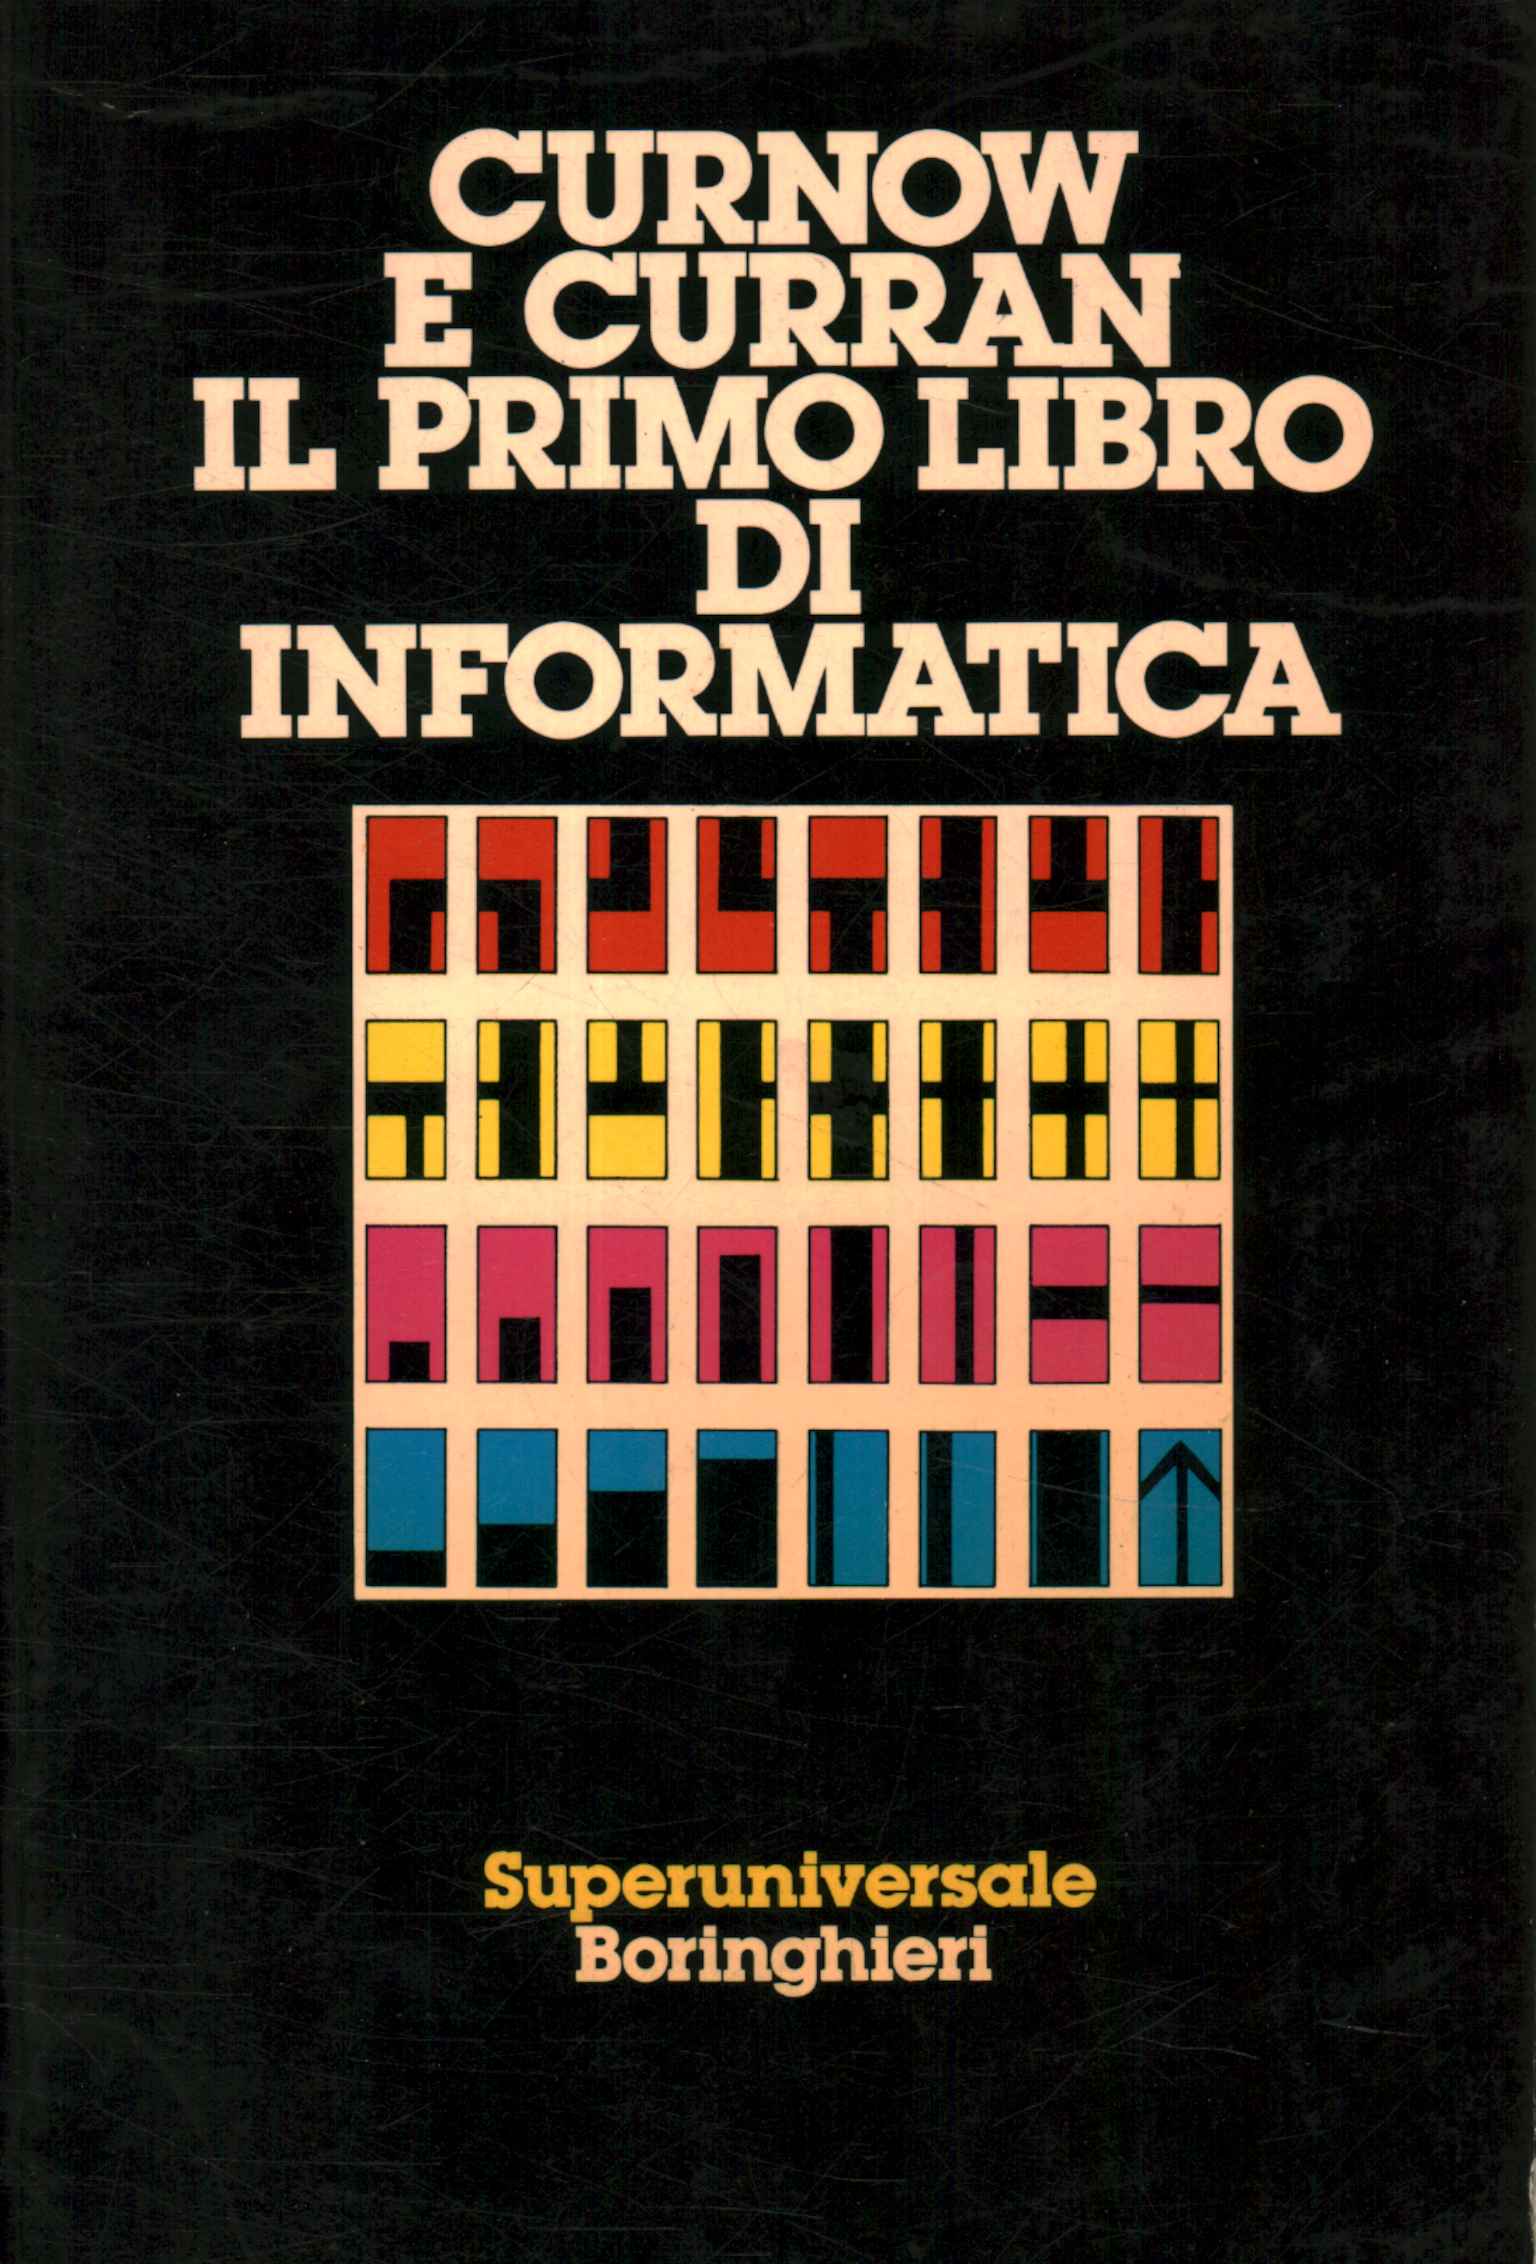 The first computer book